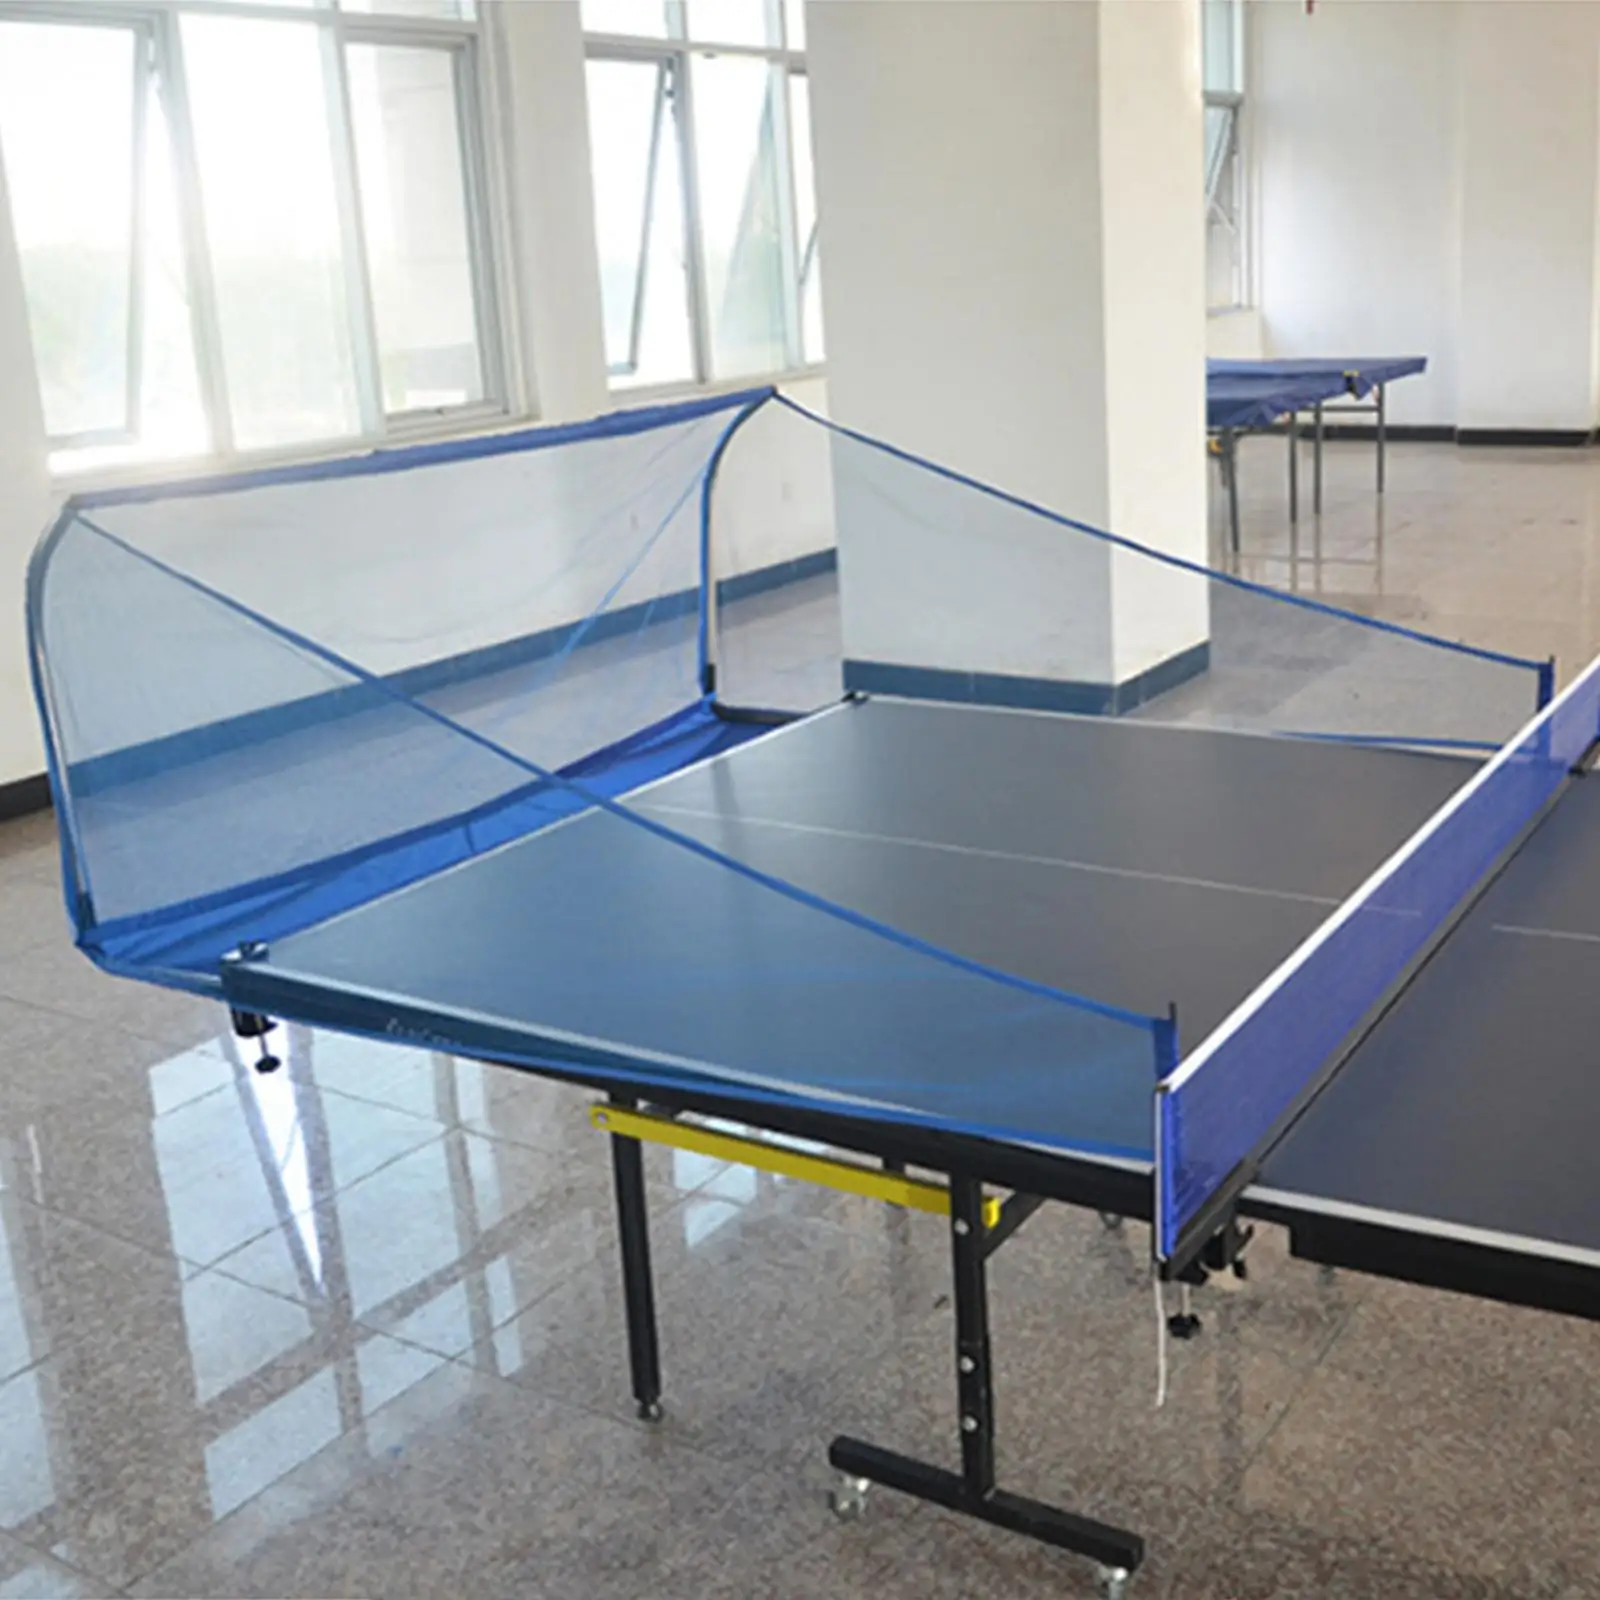 Table Tennis Ball Net Ball Collecting Net Tool Pingpong Ball Collector Table Tennis Ball Pickup Net for Practice